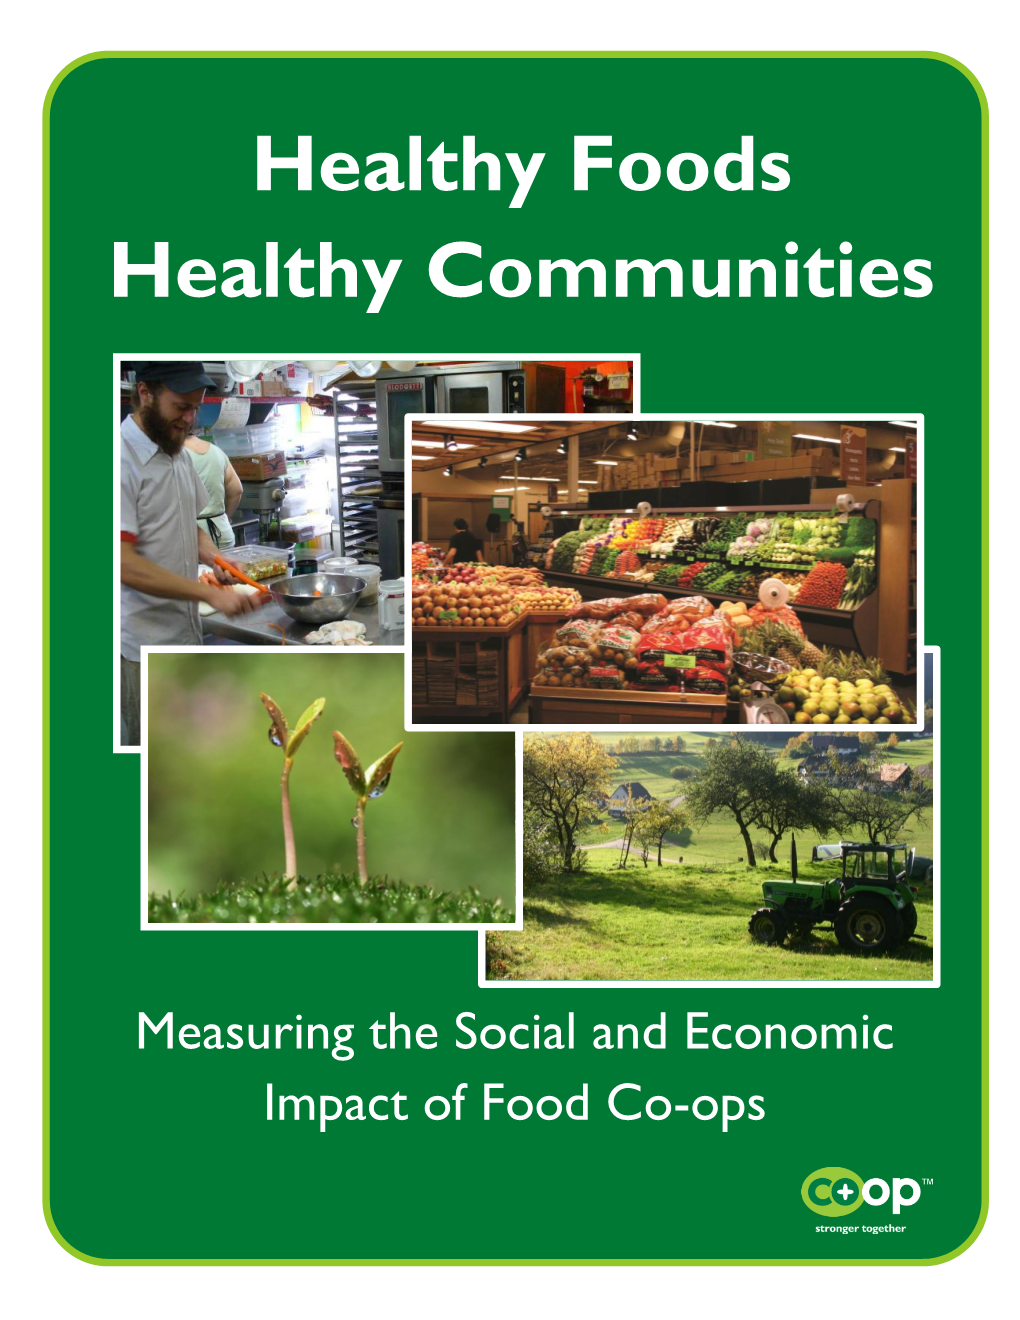 Measuring the Social and Economic Impact of Food Co-Ops